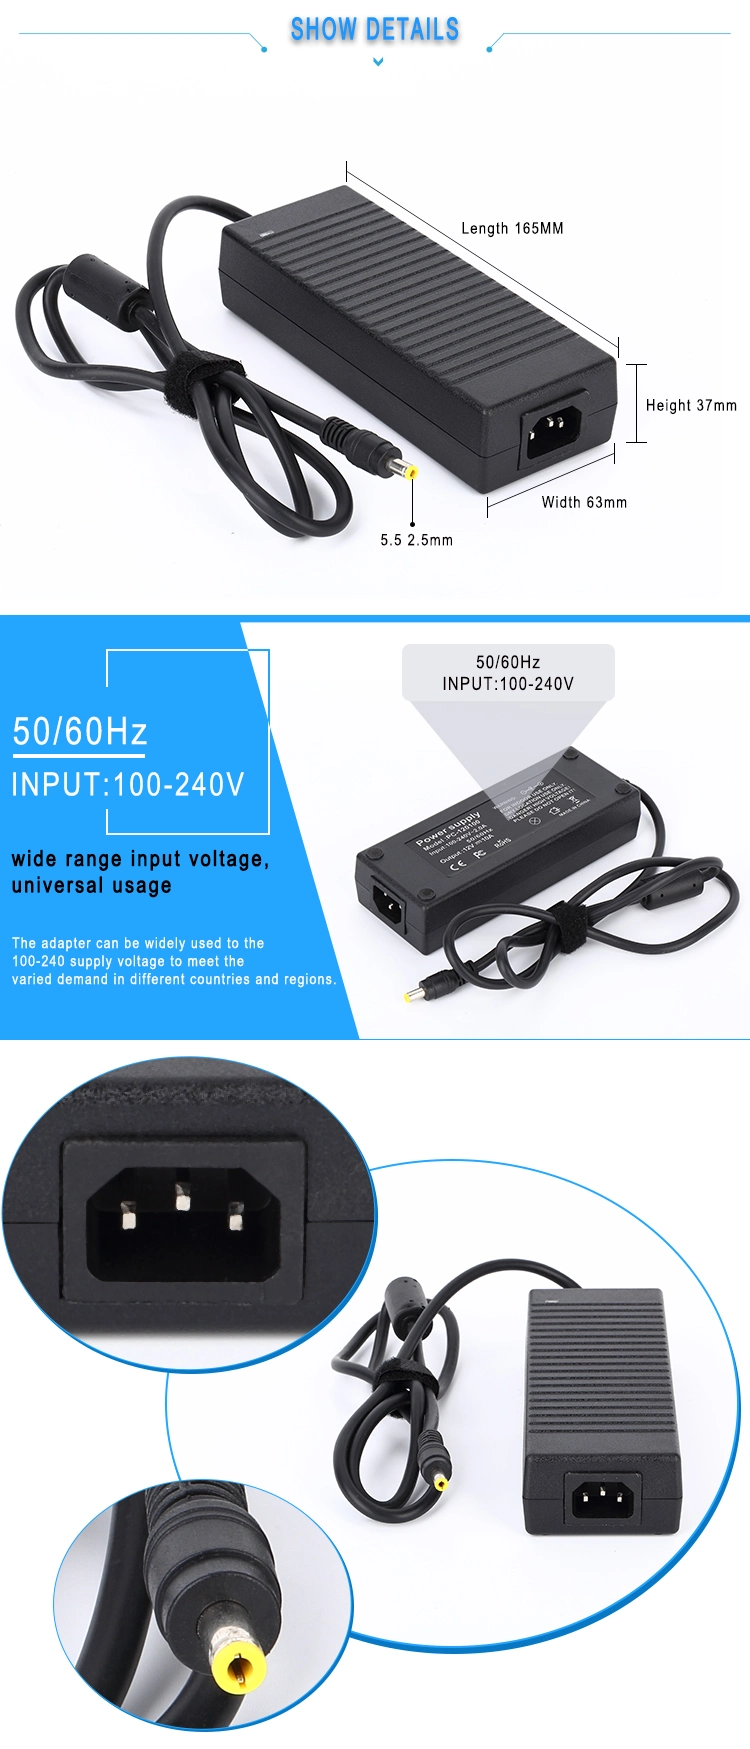 Pengchu 24V 4A 6A AC power supply 96W 144W switching power supply adapter for computer